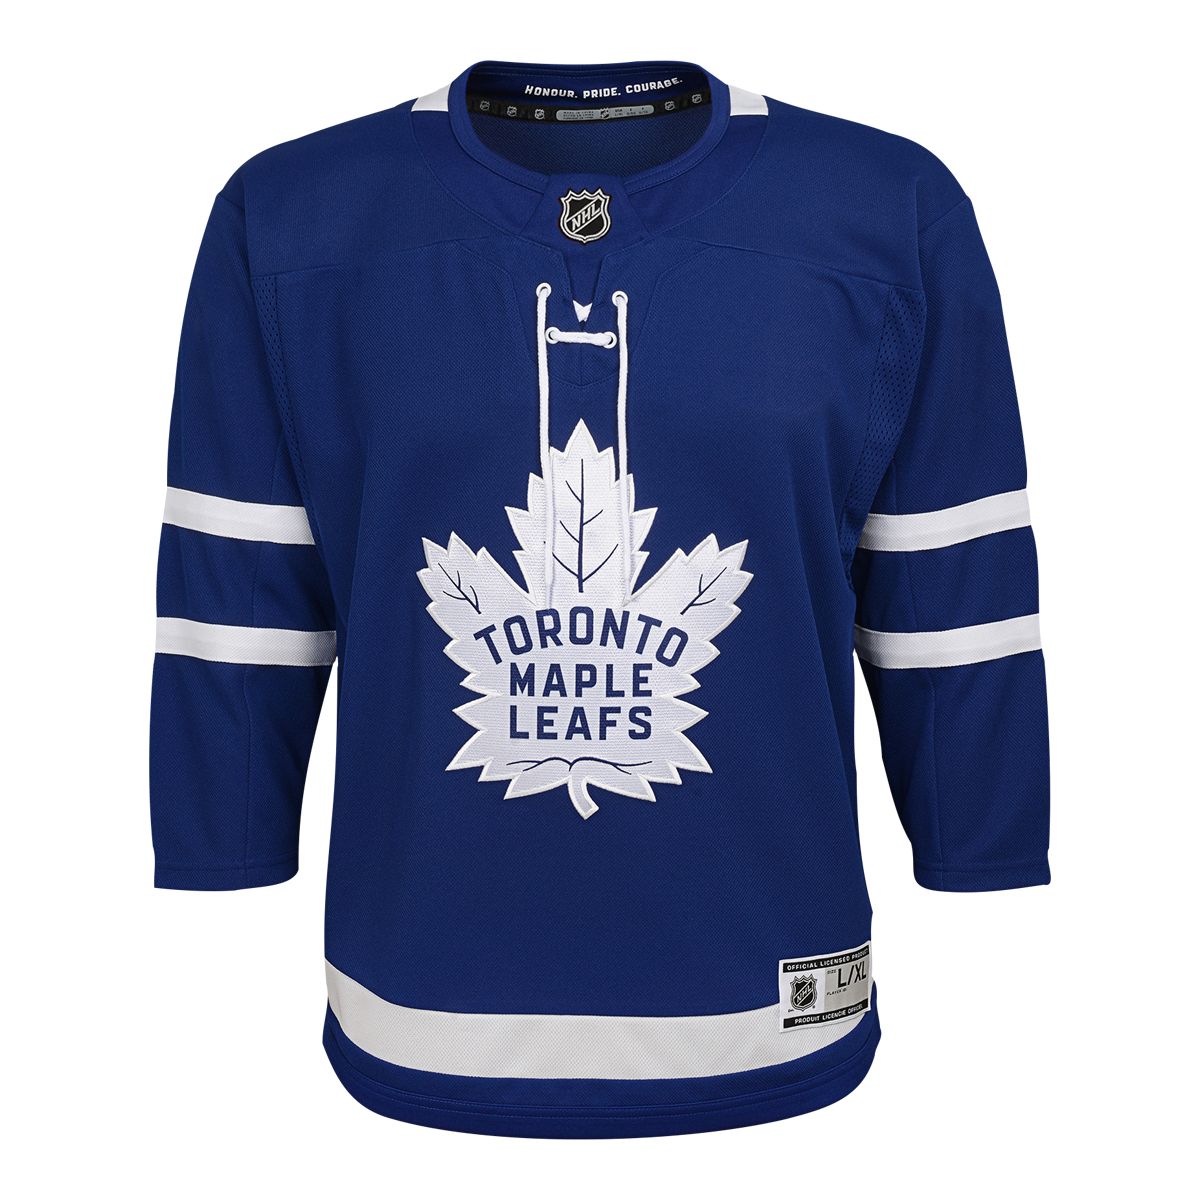 Image of Toronto Maple Leafs Replica Jersey Toddler Hockey NHL